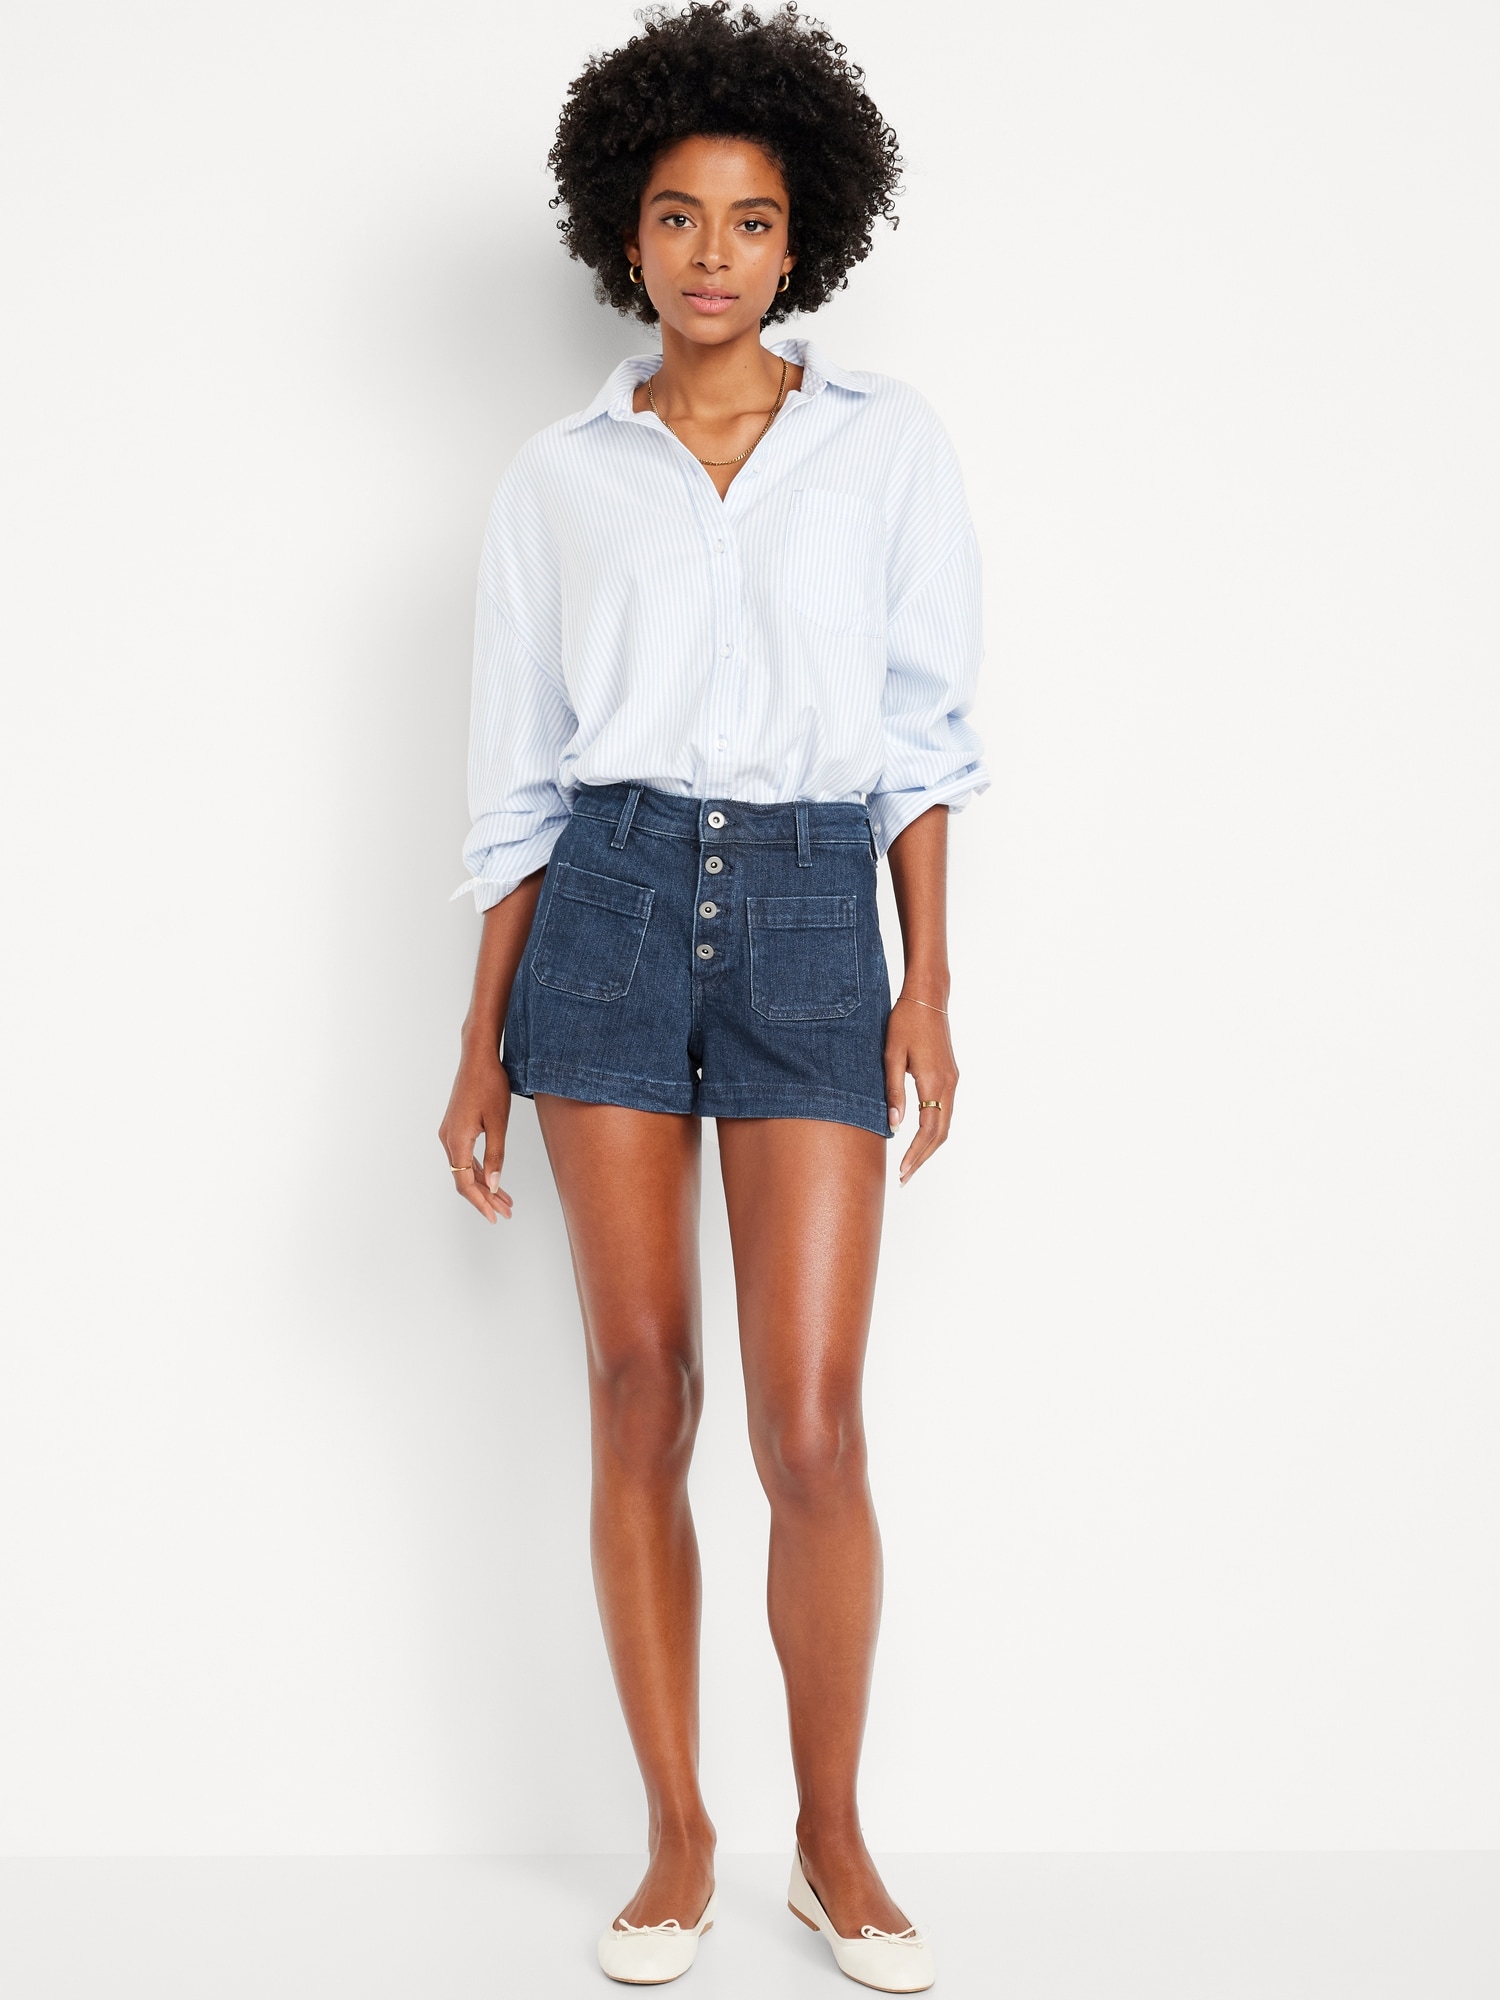 High-Waisted Jean Trouser Shorts -- 3-inch inseam